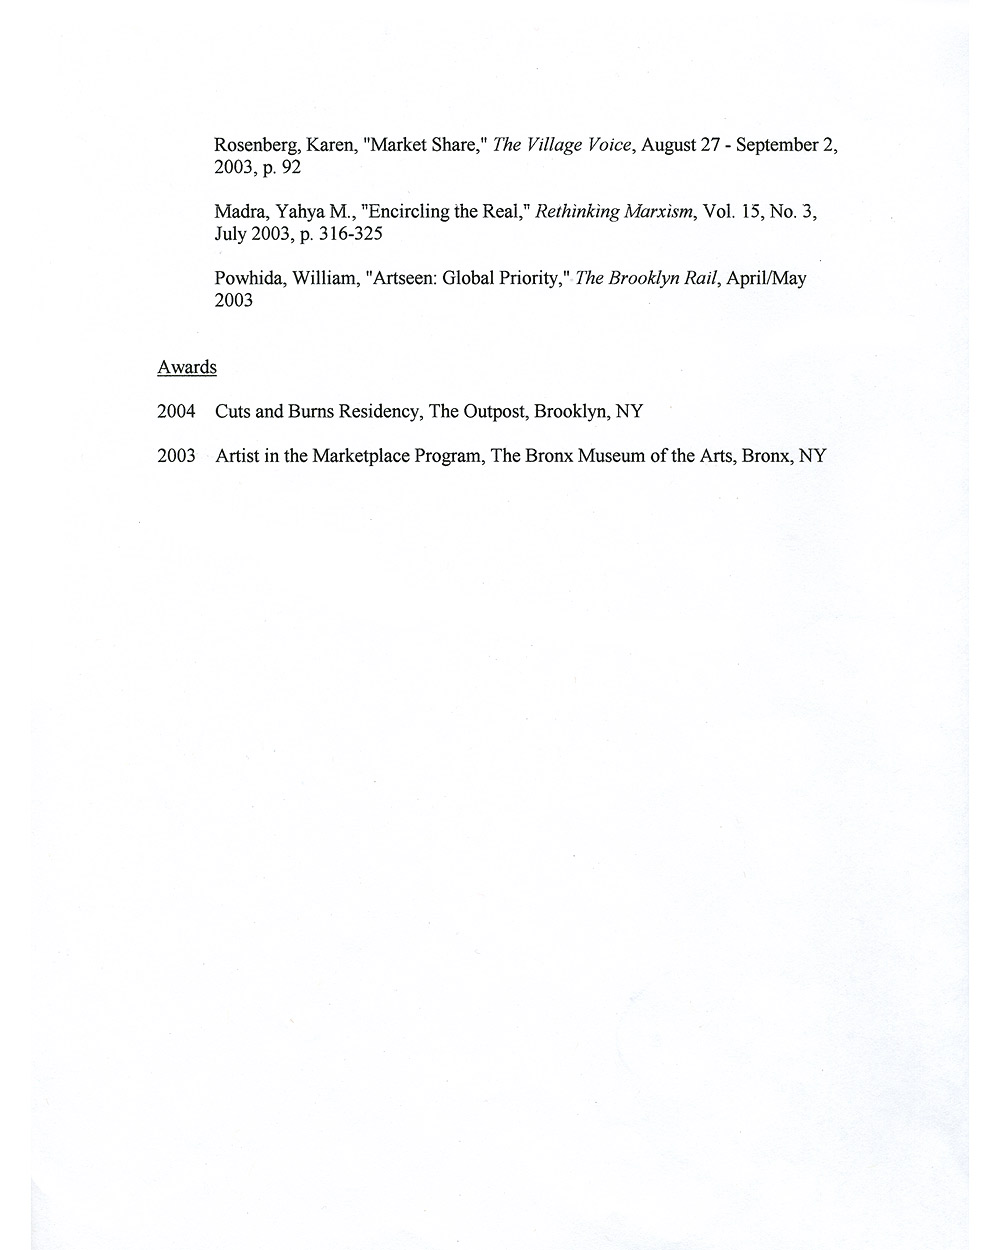 Rutherford Chang's resume, pg 2